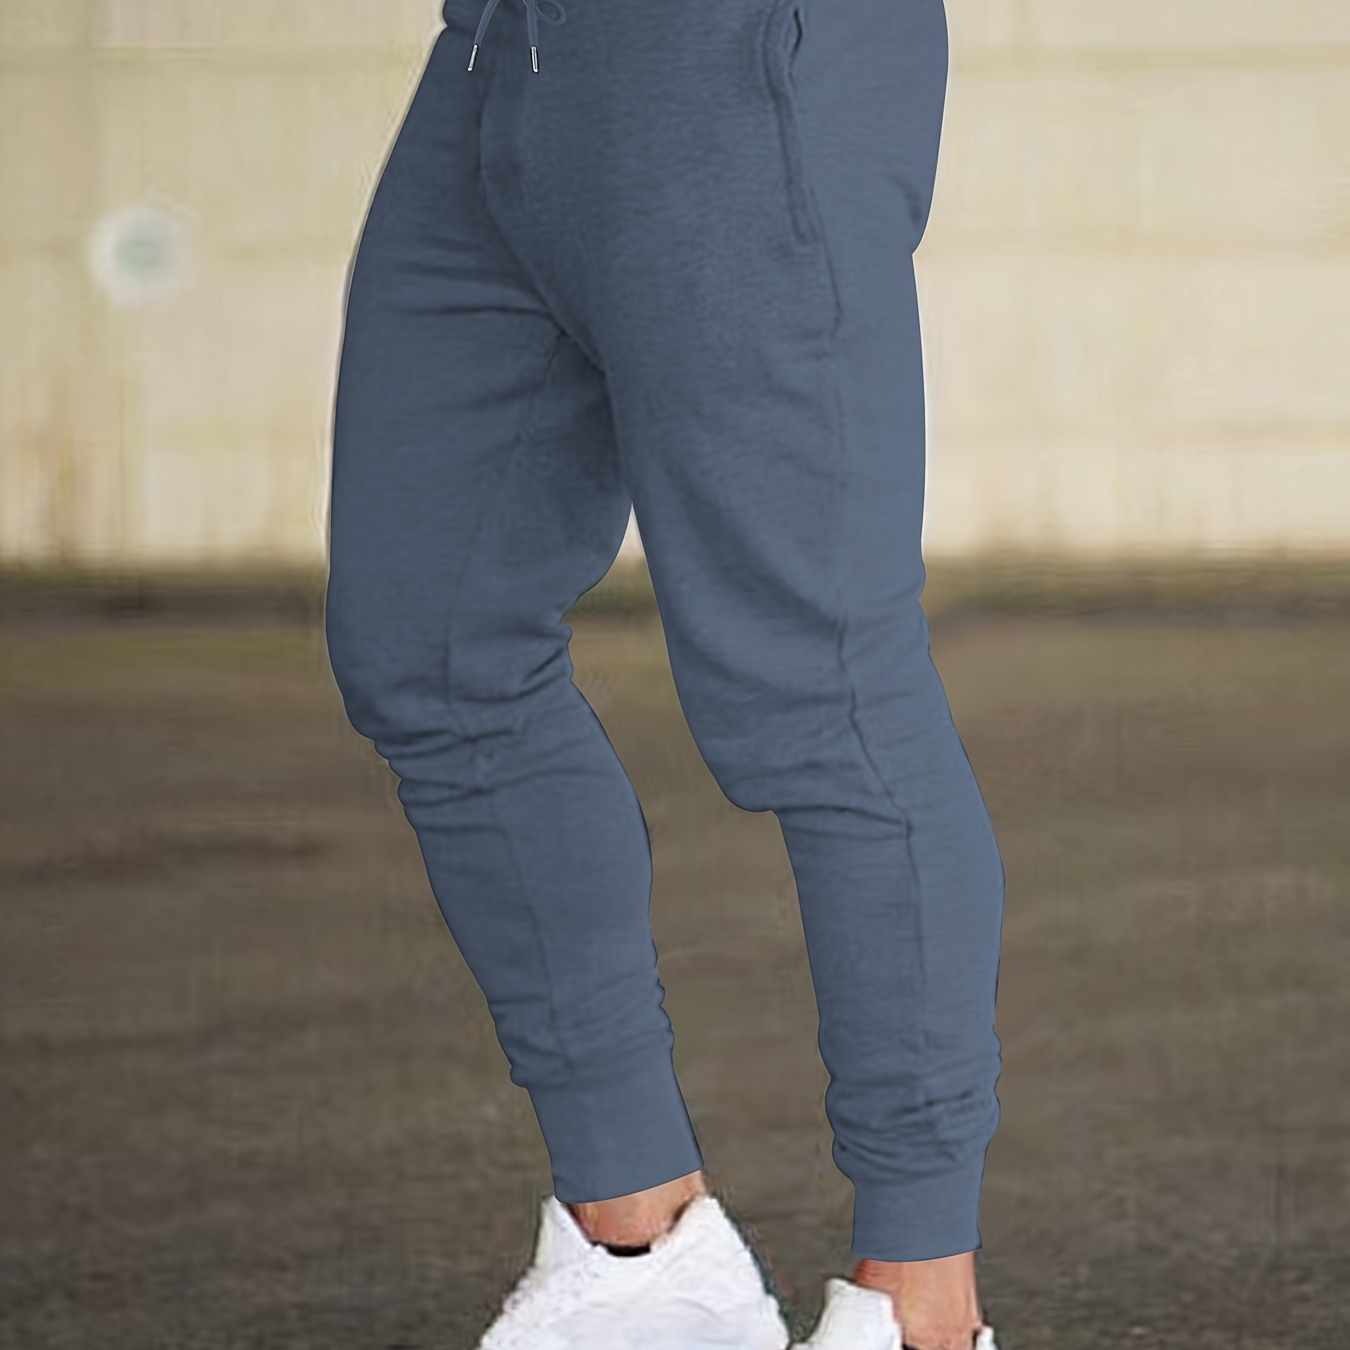 

Men's Stylish Comfy Solid Jogger With Pockets, Causal Breathable Slightly Stretch Slim-fit Drawstring Men's Bottom Clothing For City Walk Street Hanging Outdoor Activities